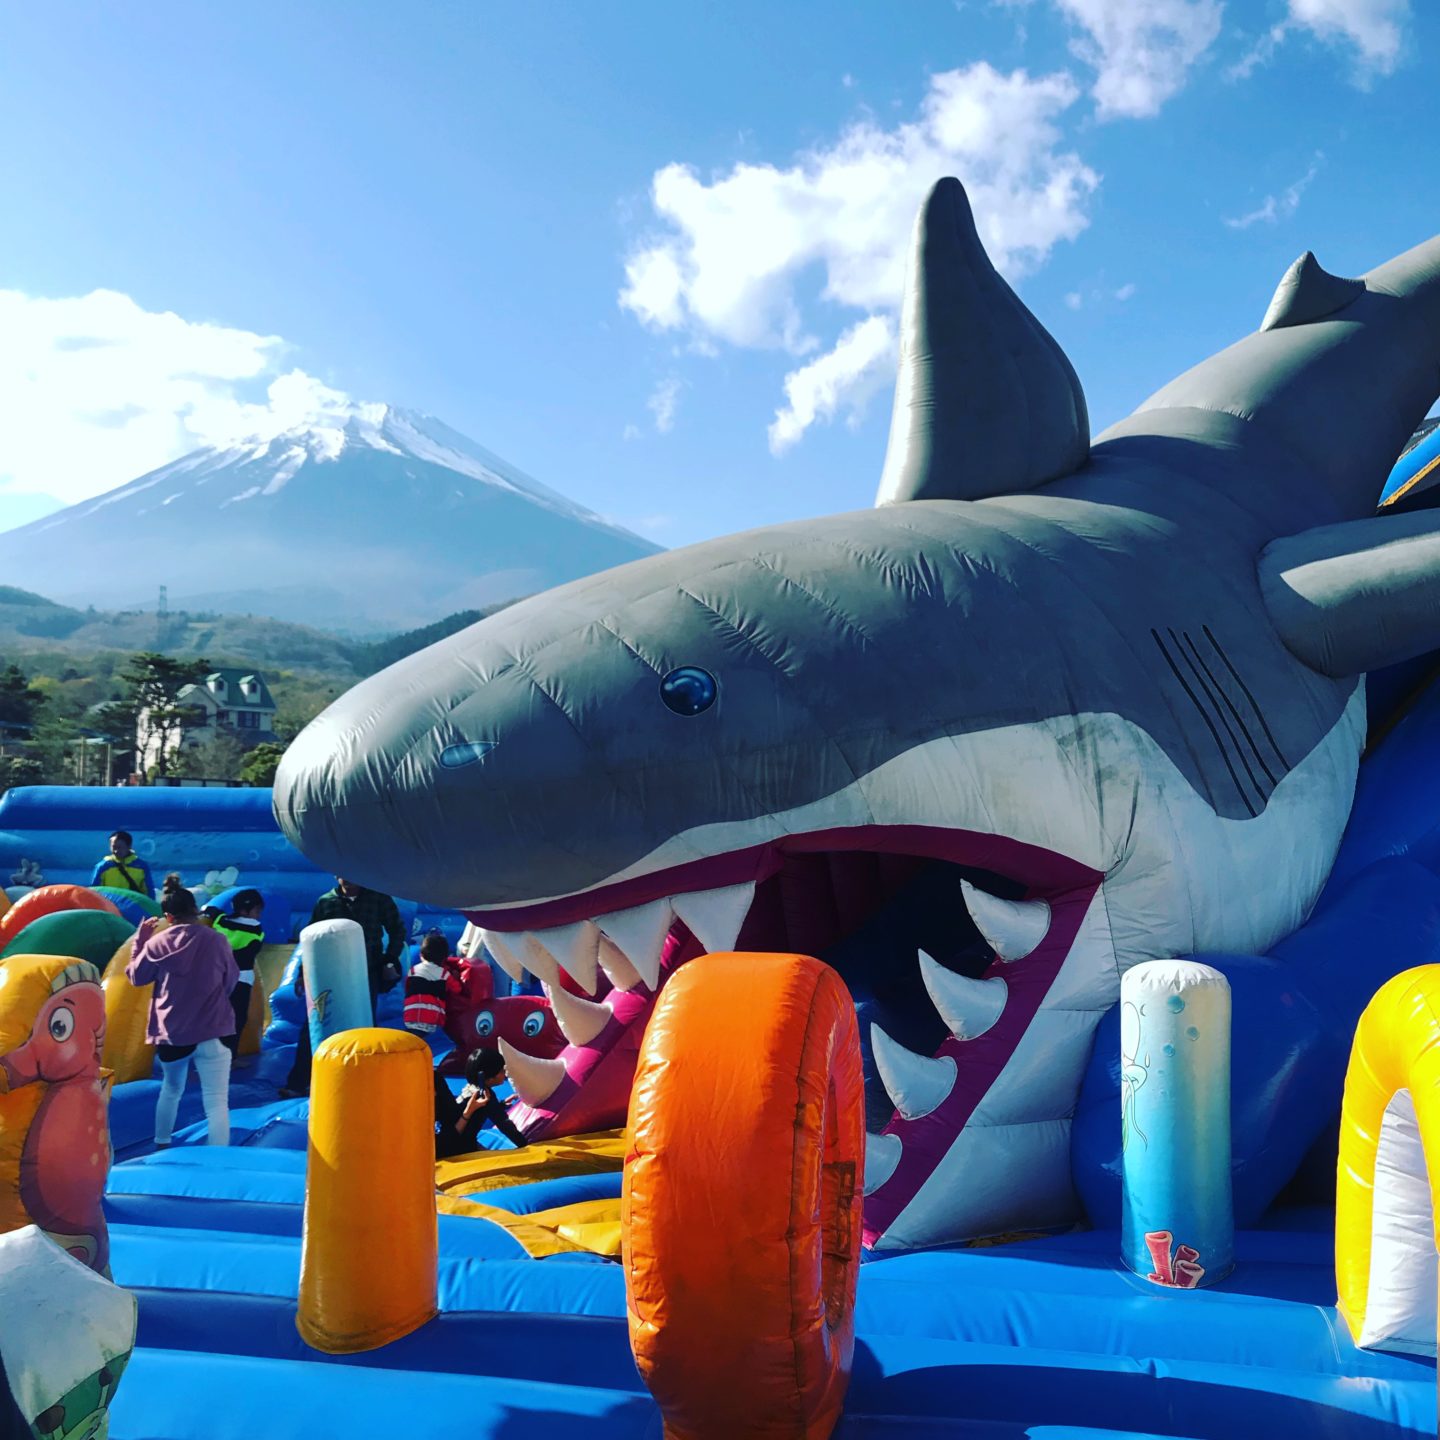 DAY TRIP: SYLVANIAN FAMILIES, BEST FUJI VIEW AND BIGGEST BOUNCY CASTLES EVER